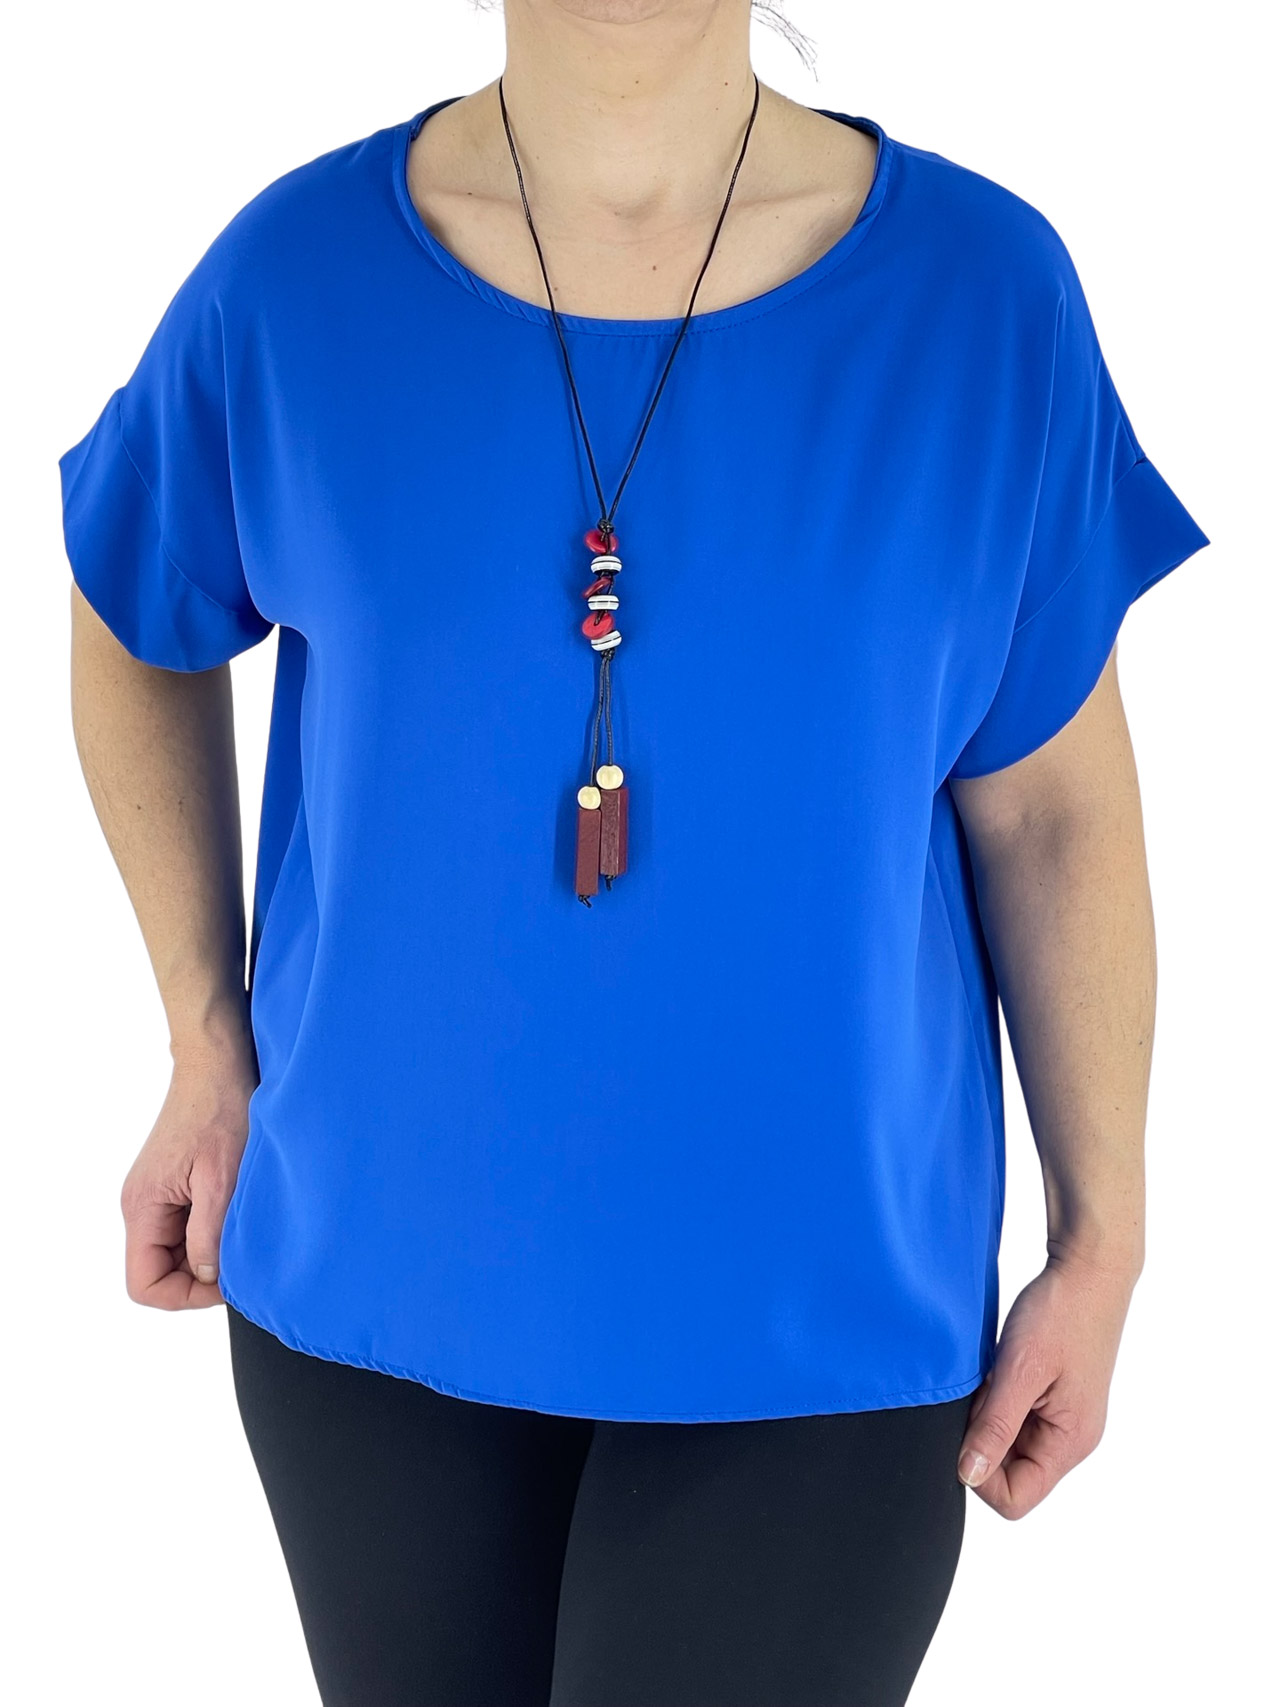 Women's monochrome blouse with necklace code 21066